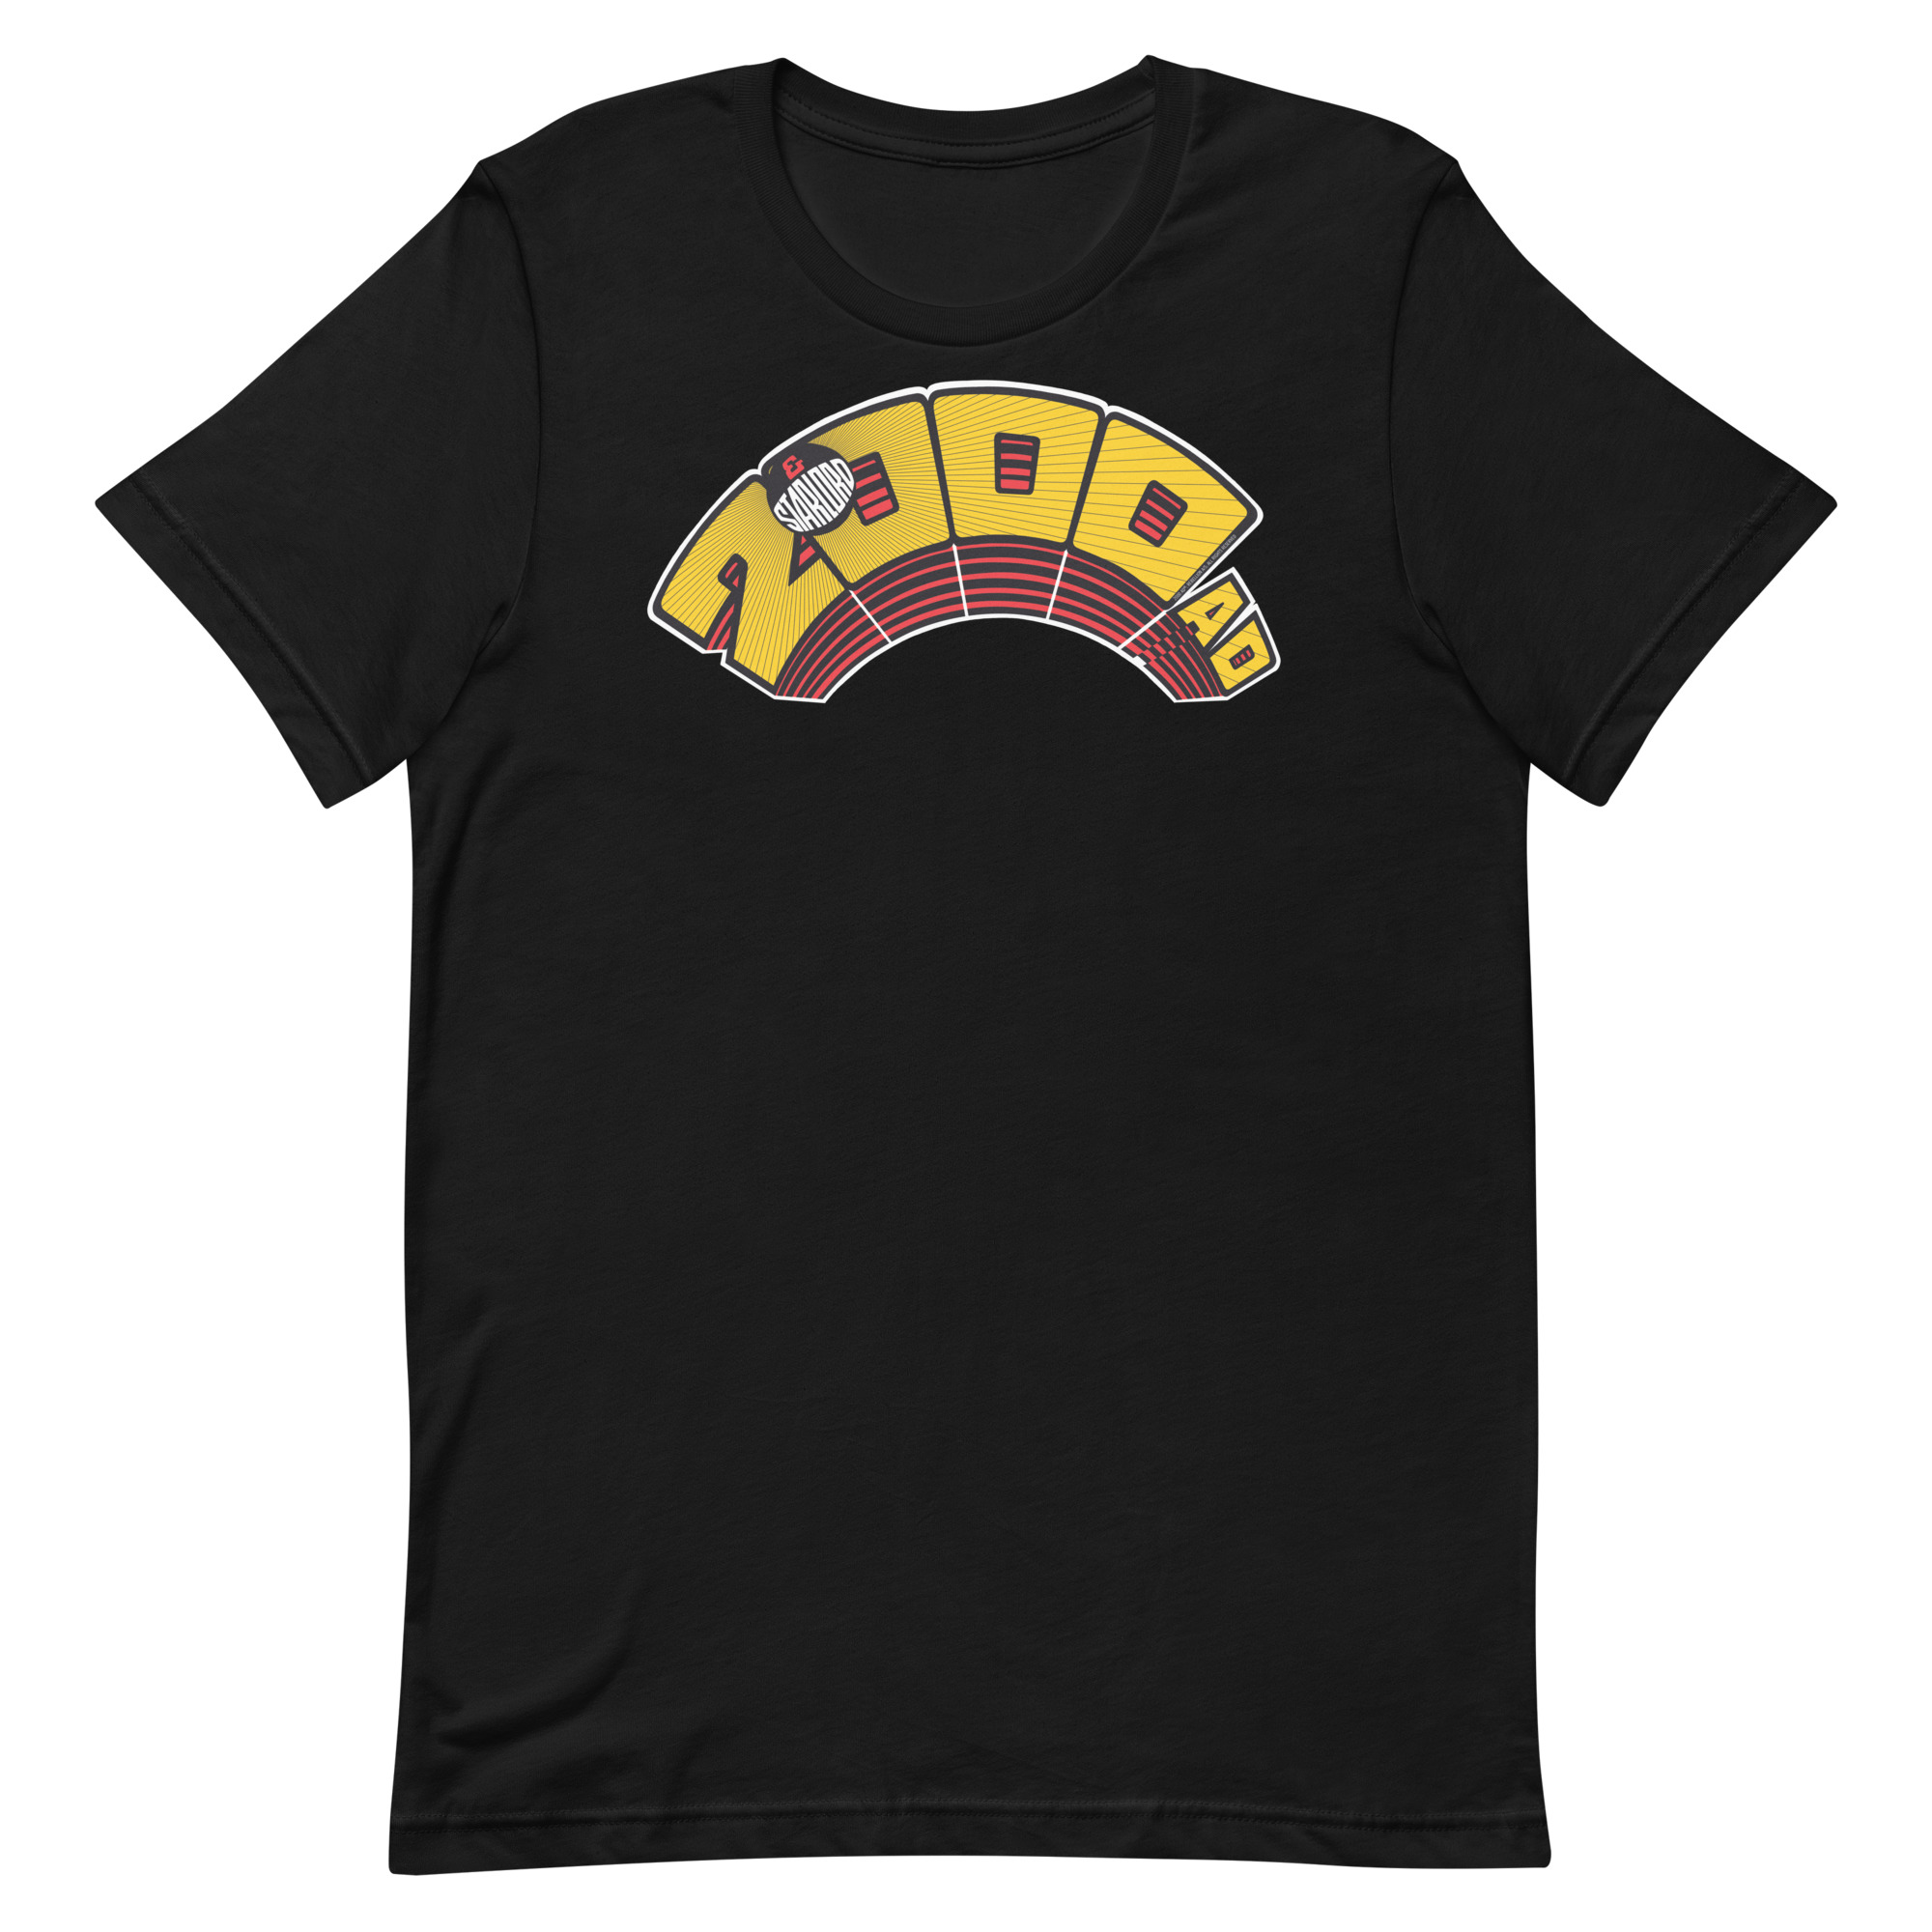 Image of a Black coloured 2000AD Starlord Arch t-shirt featuring a large 2000AD Starlord Arch logo in the middle